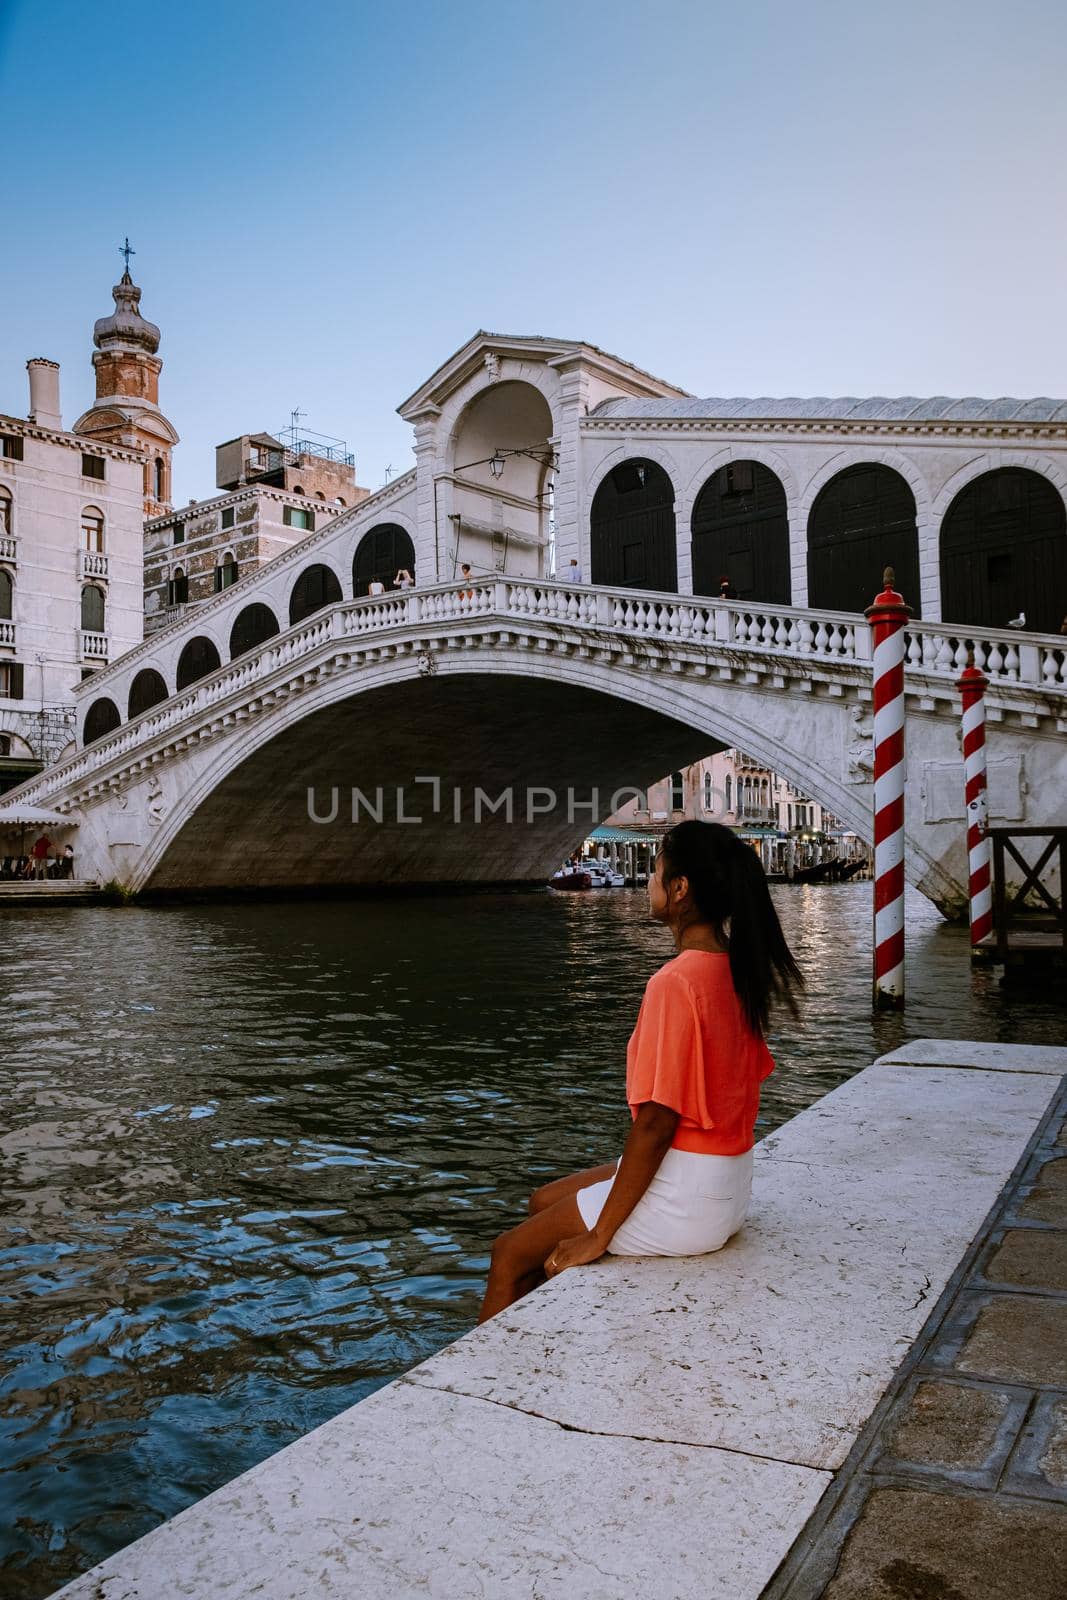 woman on a city trip to Venice Italy, colorful streets with canals Venice. Europe